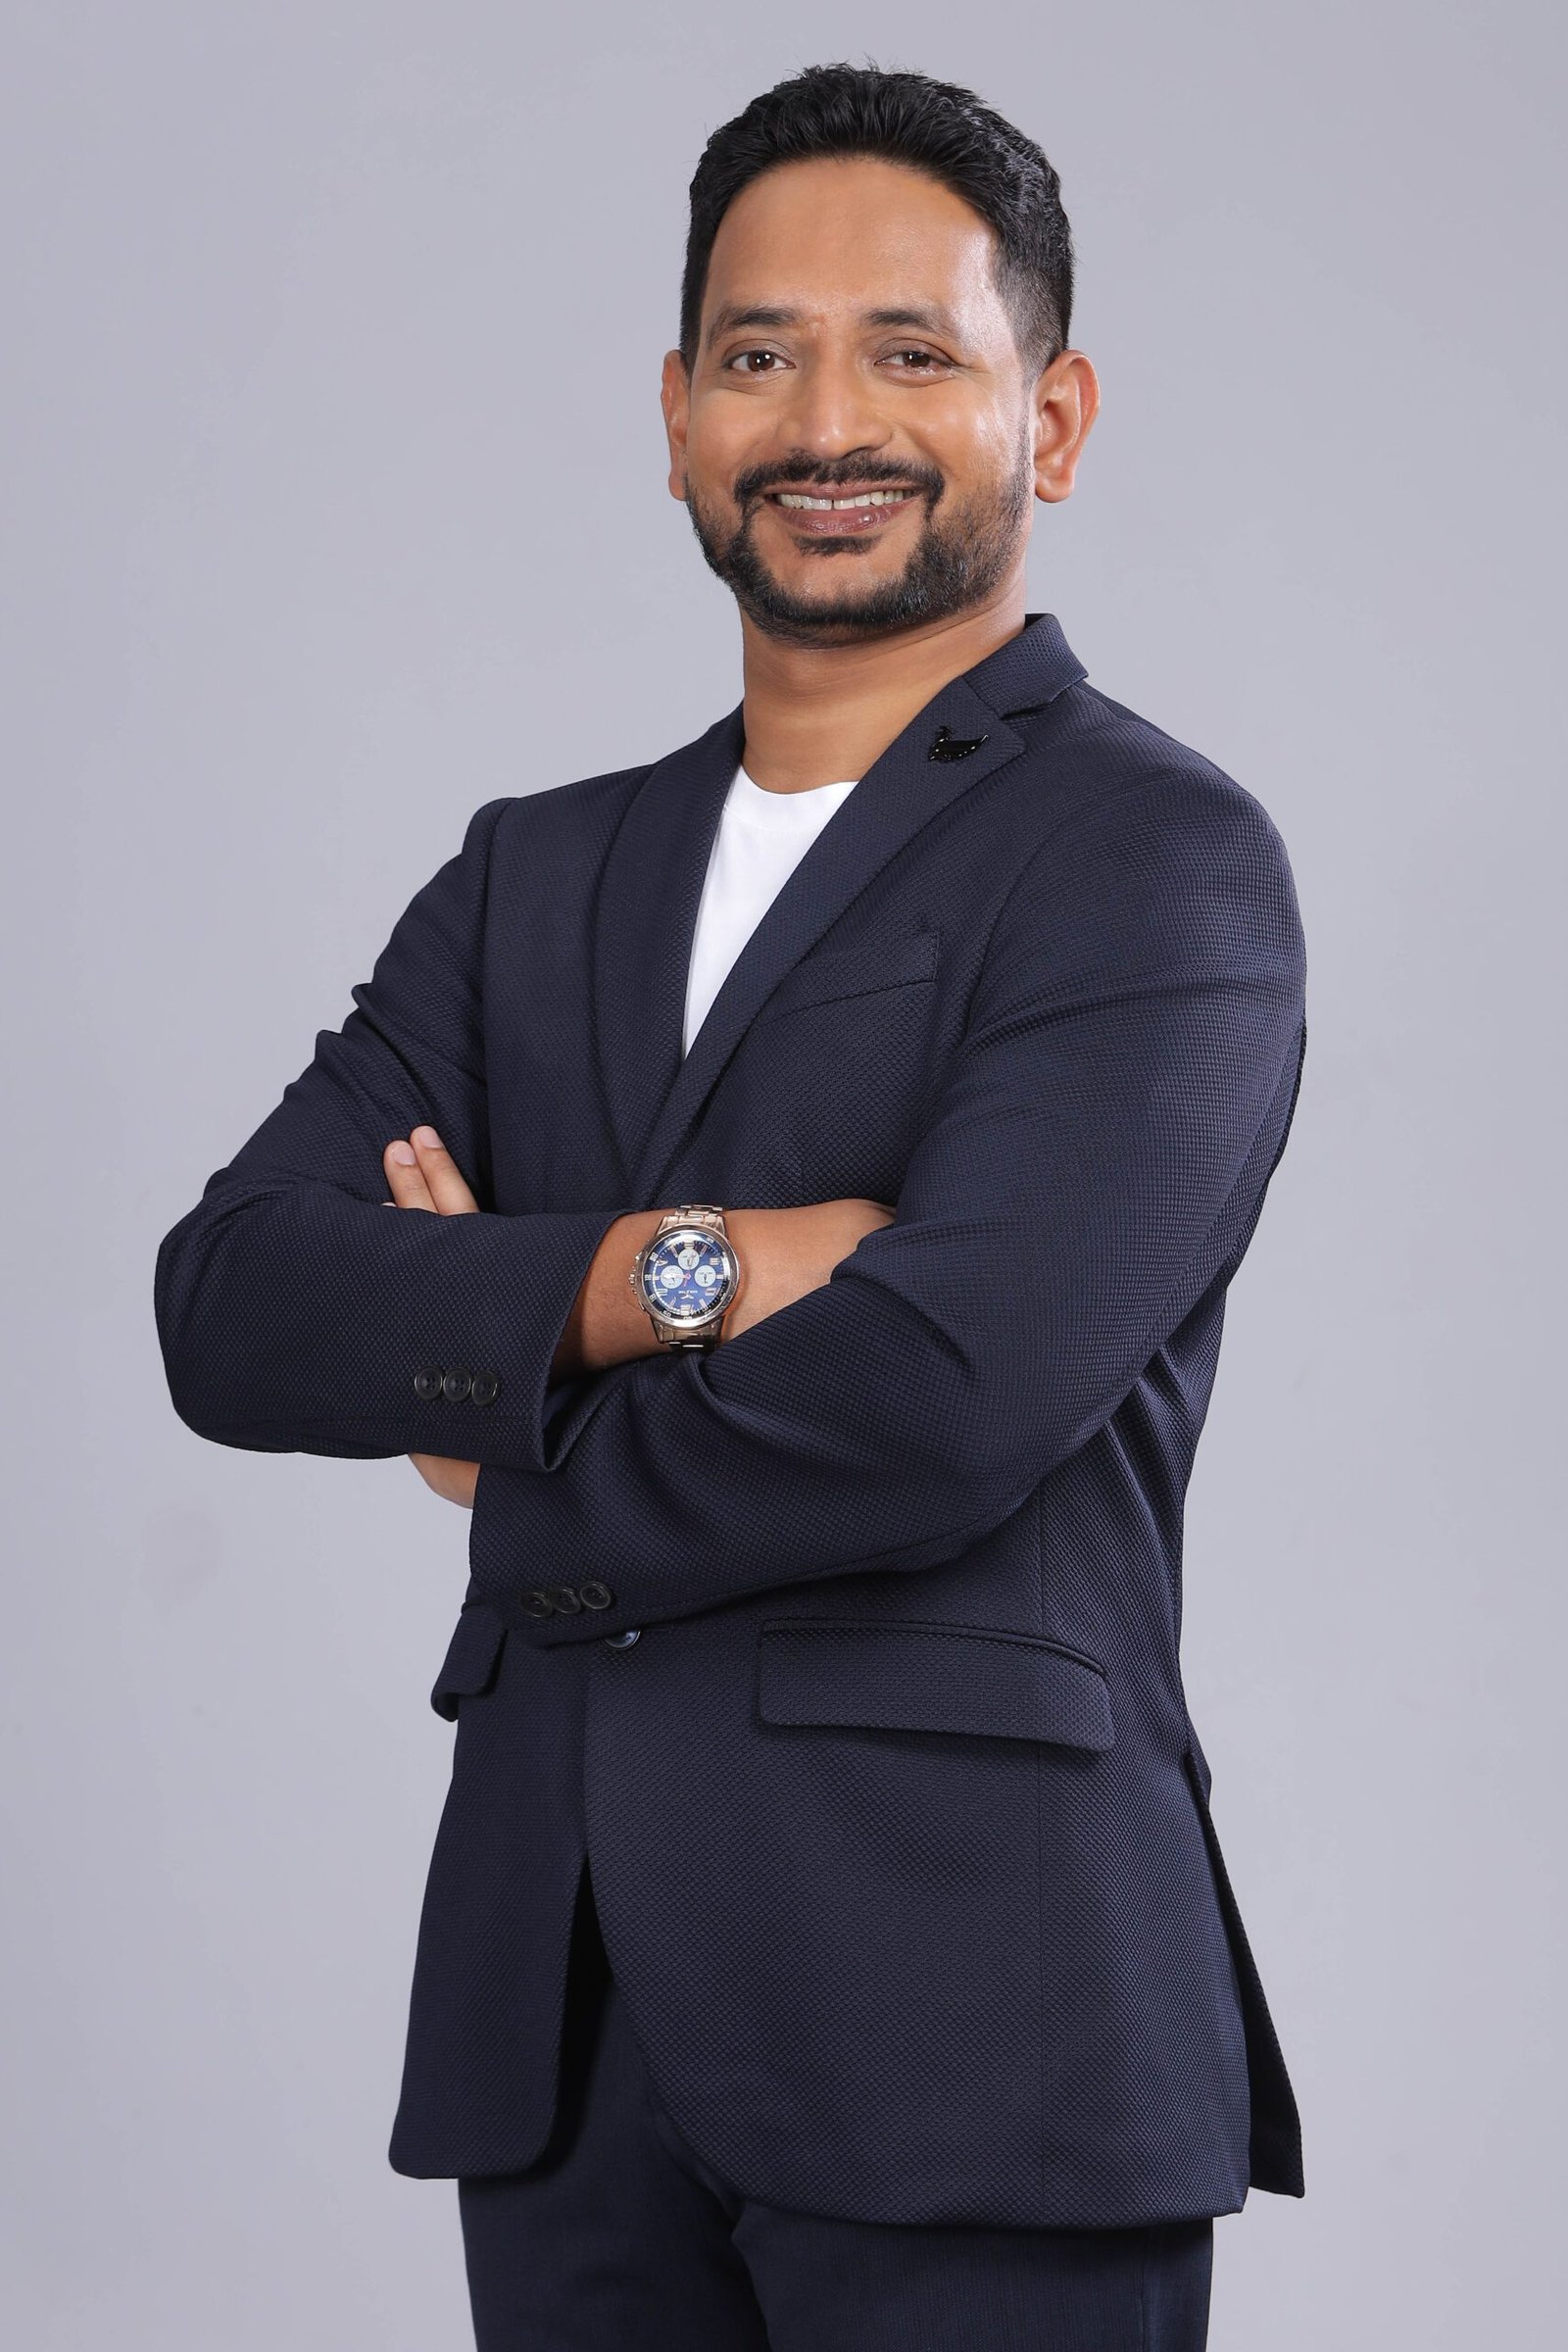 bhive ceo business shoot_-201